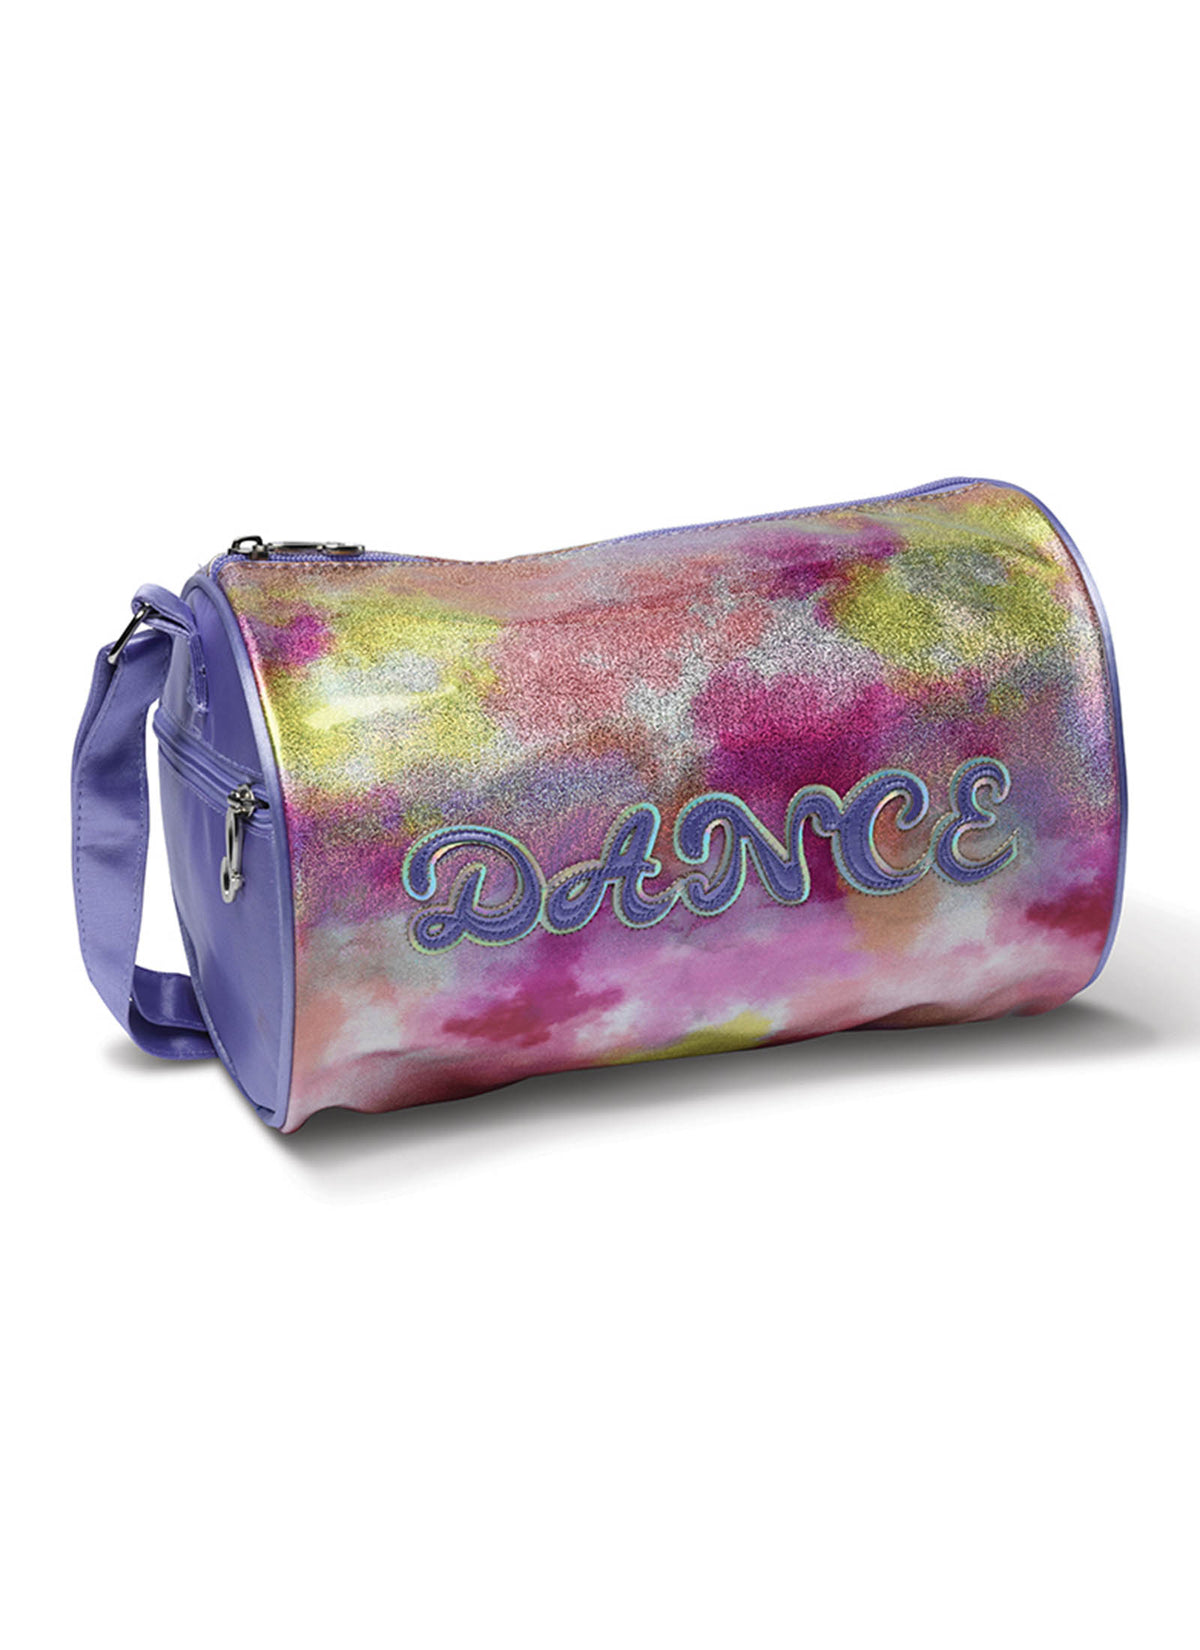 My Sparkly Watercolor Duffel